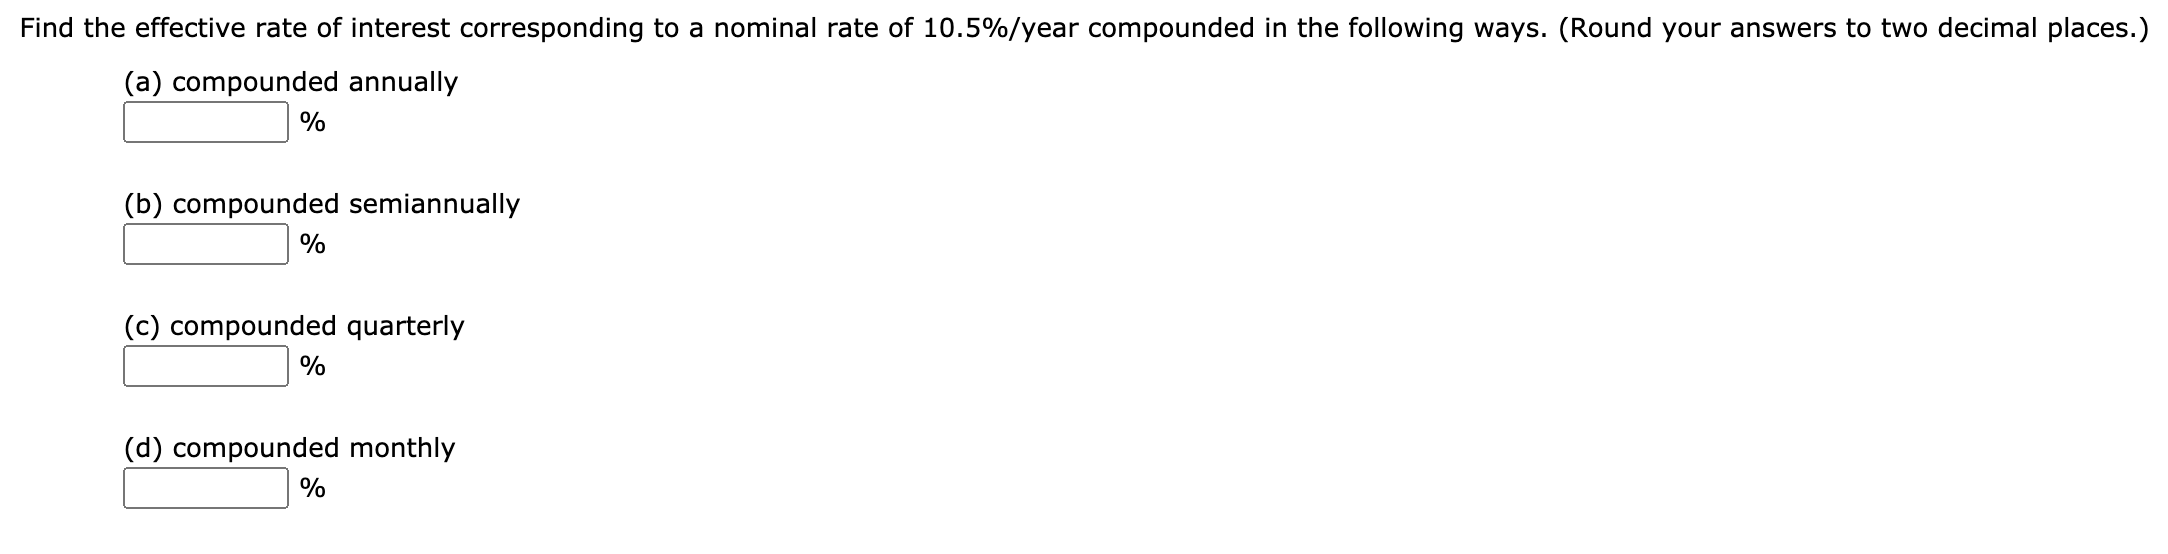 Find the effective rate of interest corresponding to a nominal rate of 10.5%/year compounded in the following ways. (Round your answers to two decimal places.)
(a) compounded annually
%
(b) compounded semiannually
%
(c) compounded quarterly
%
(d) compounded monthly
%
